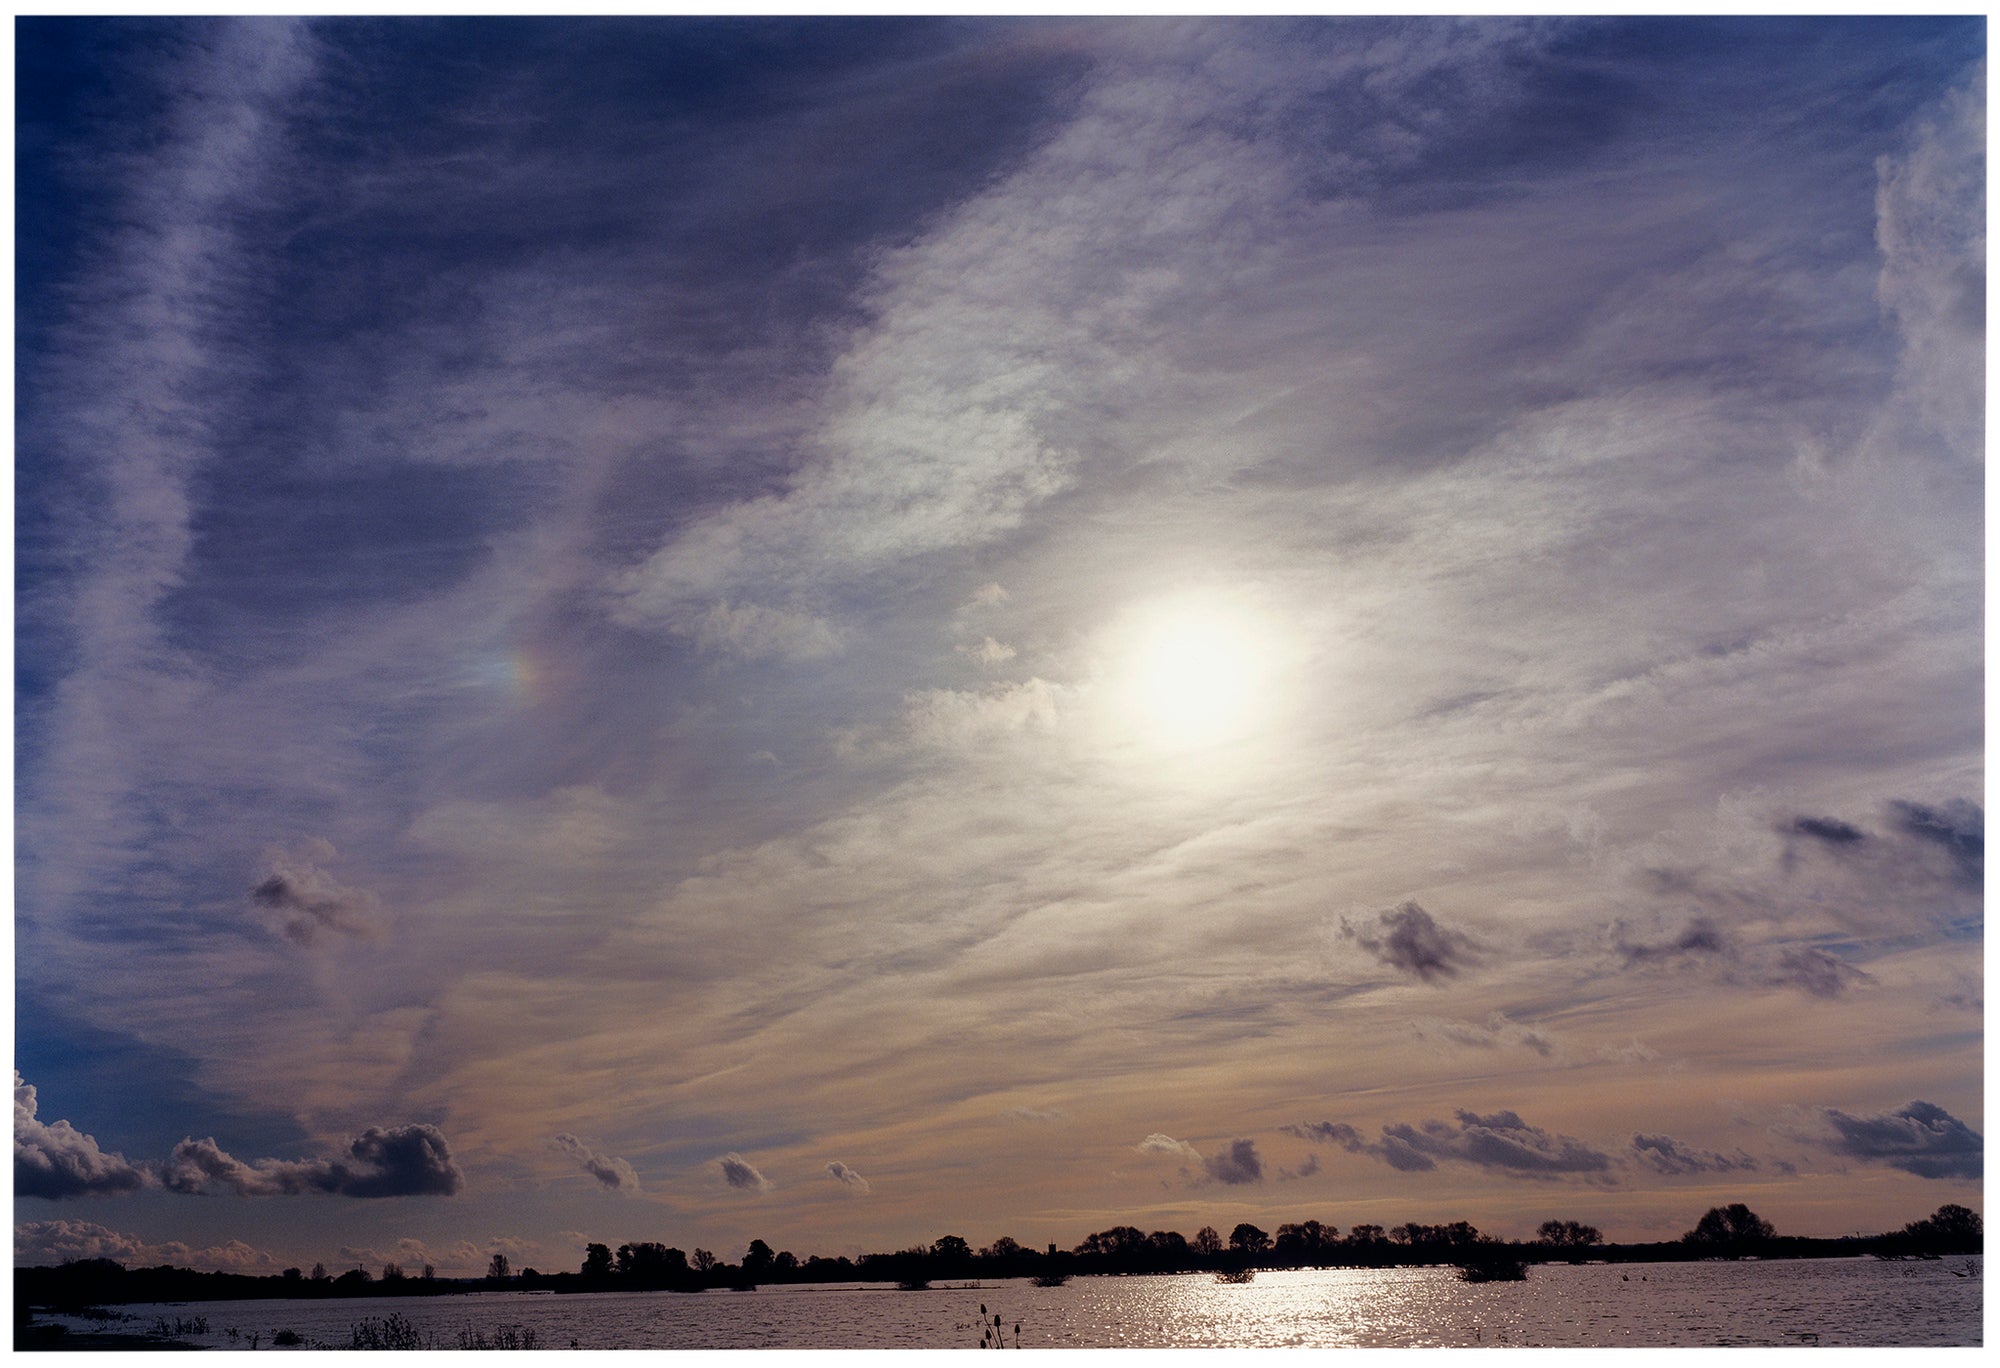 Photograph by Richard Heeps. A big sky with exciting clouds, an obscured sun and a flood of water features at the bottom reflecting the sun's light.